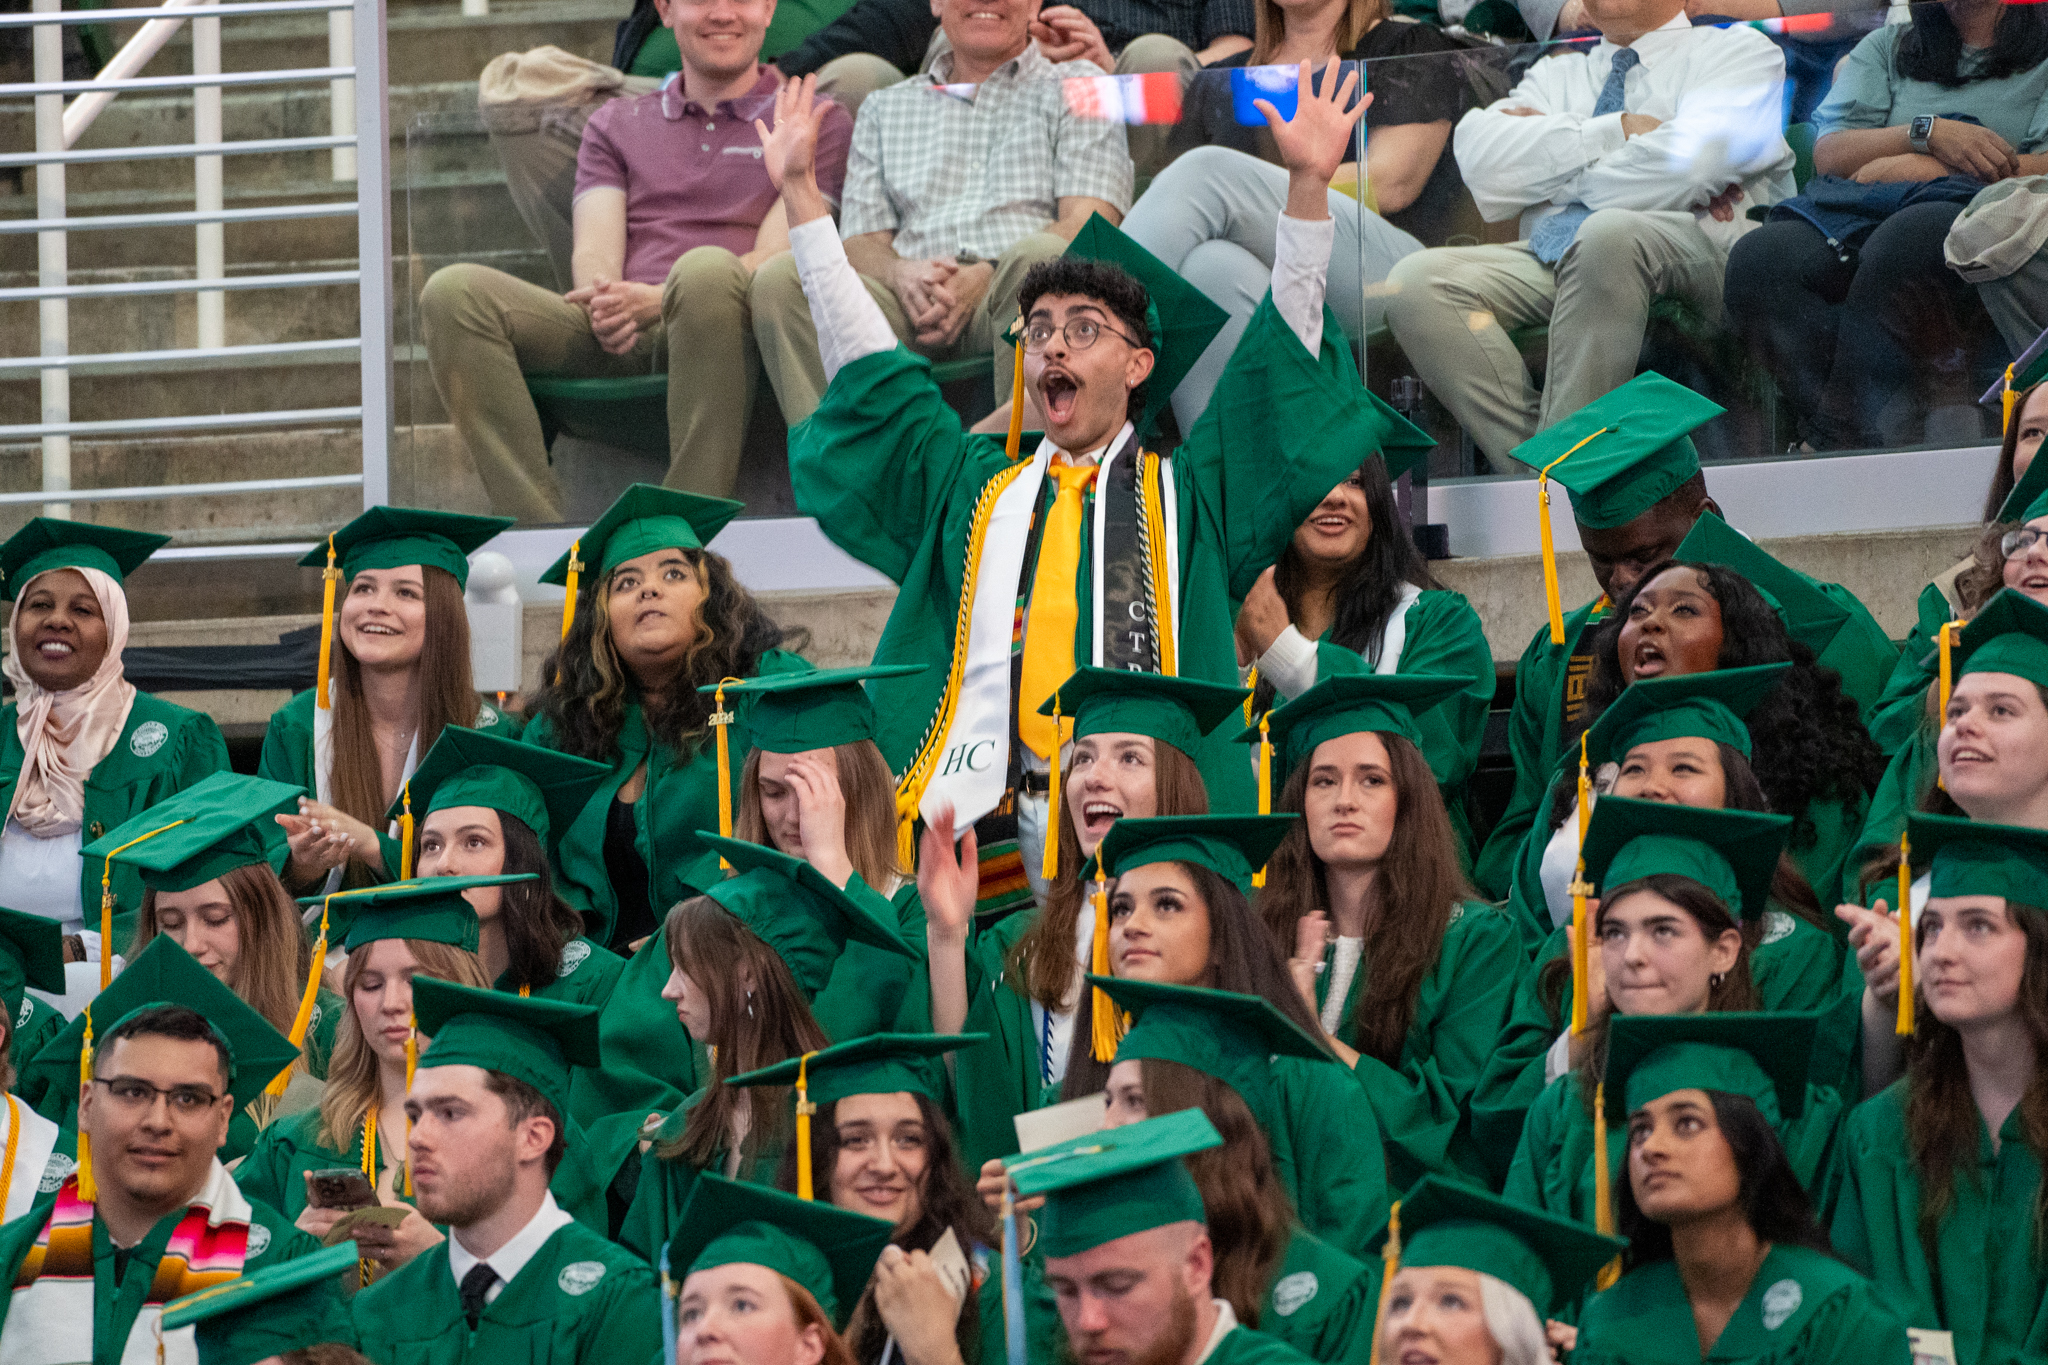 Students in green gowns celebration at commencement